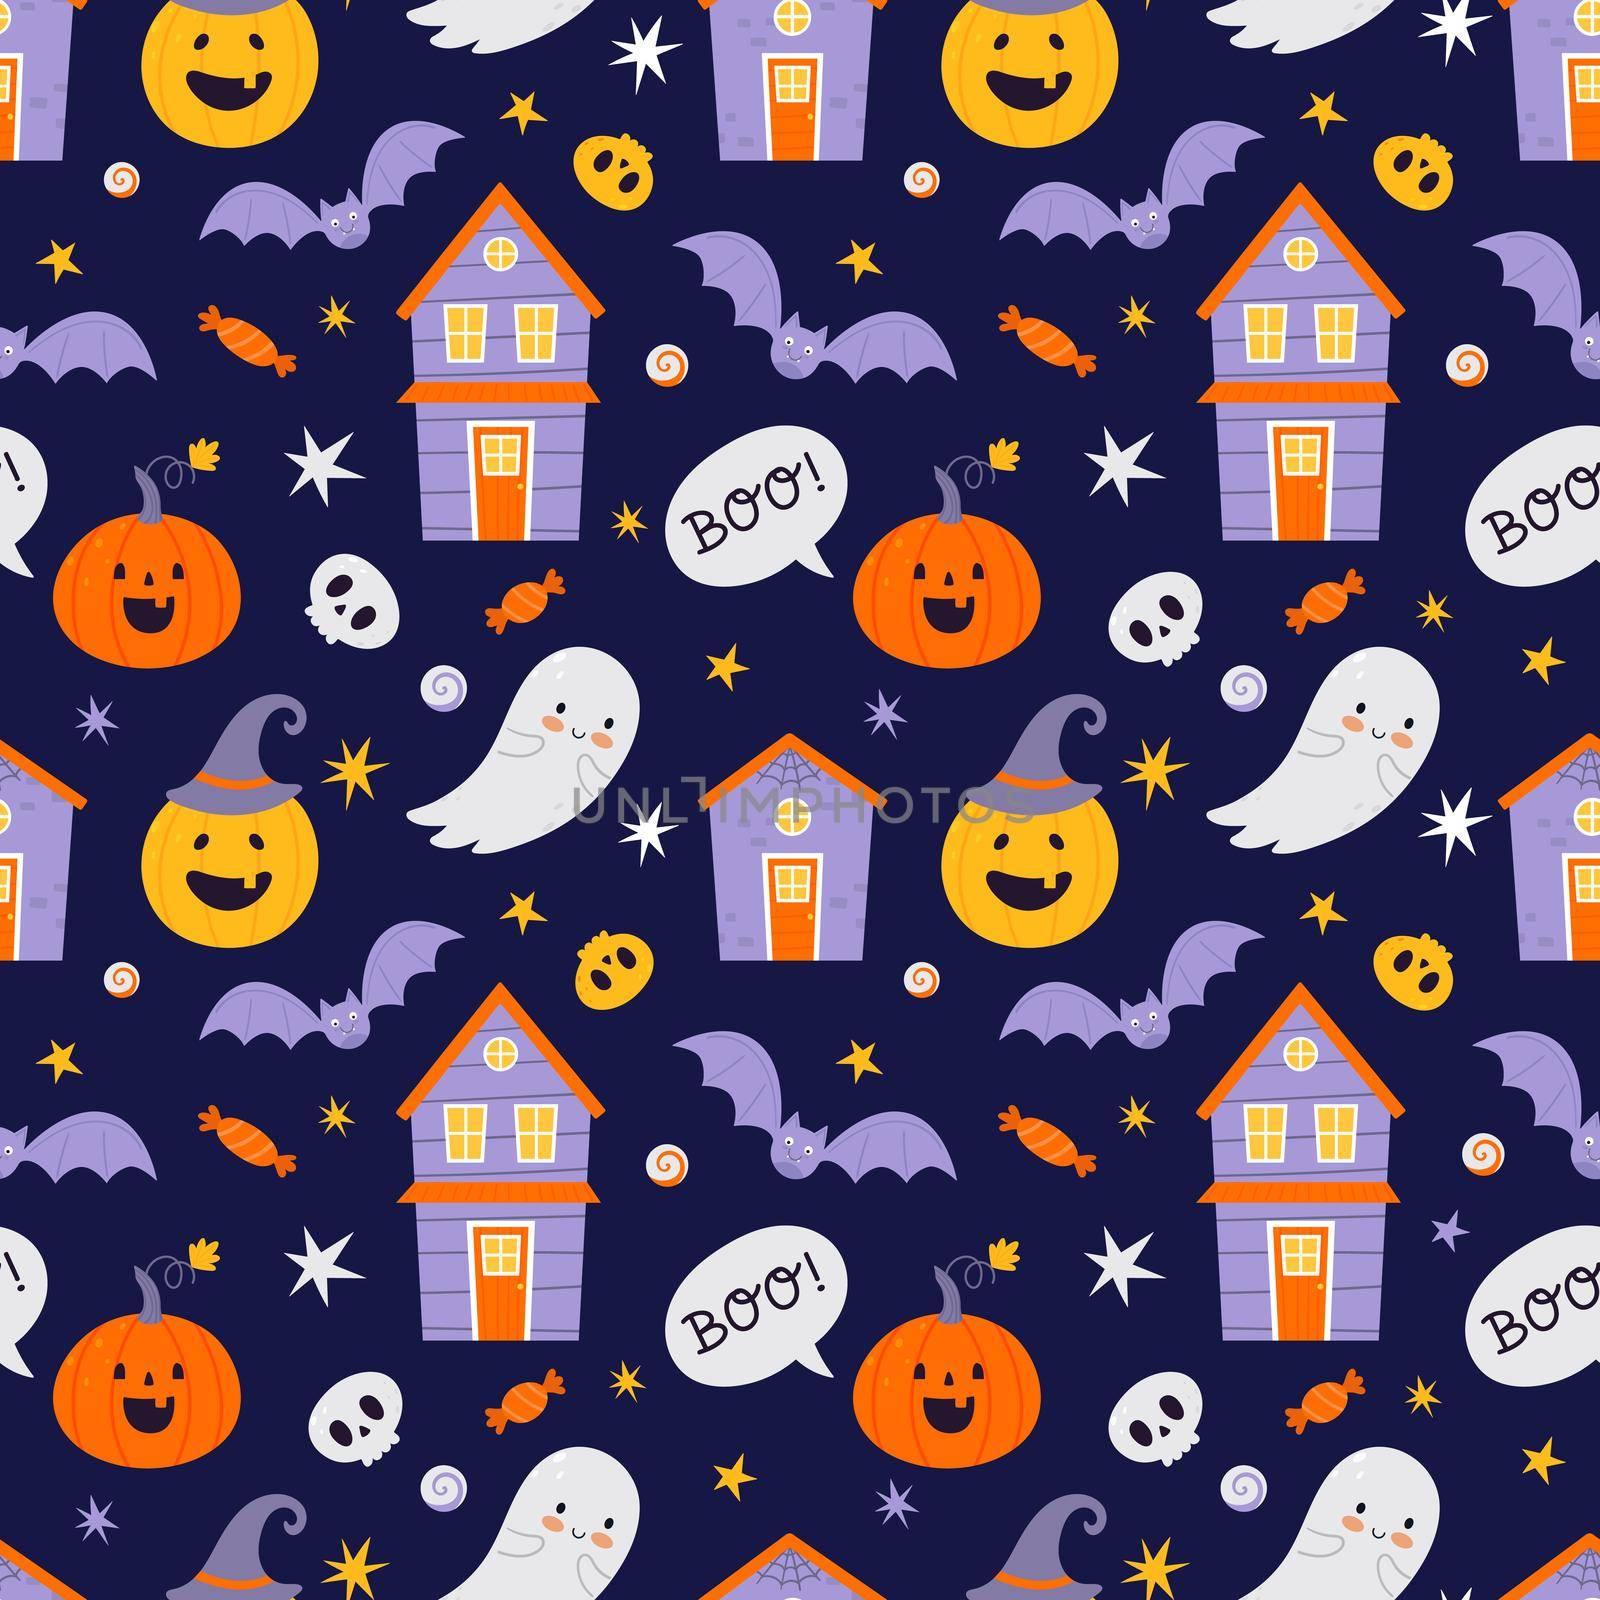 Halloween seamless pattern with pumpkins and bats and other Halloween symbols. by Lena_Khmelniuk